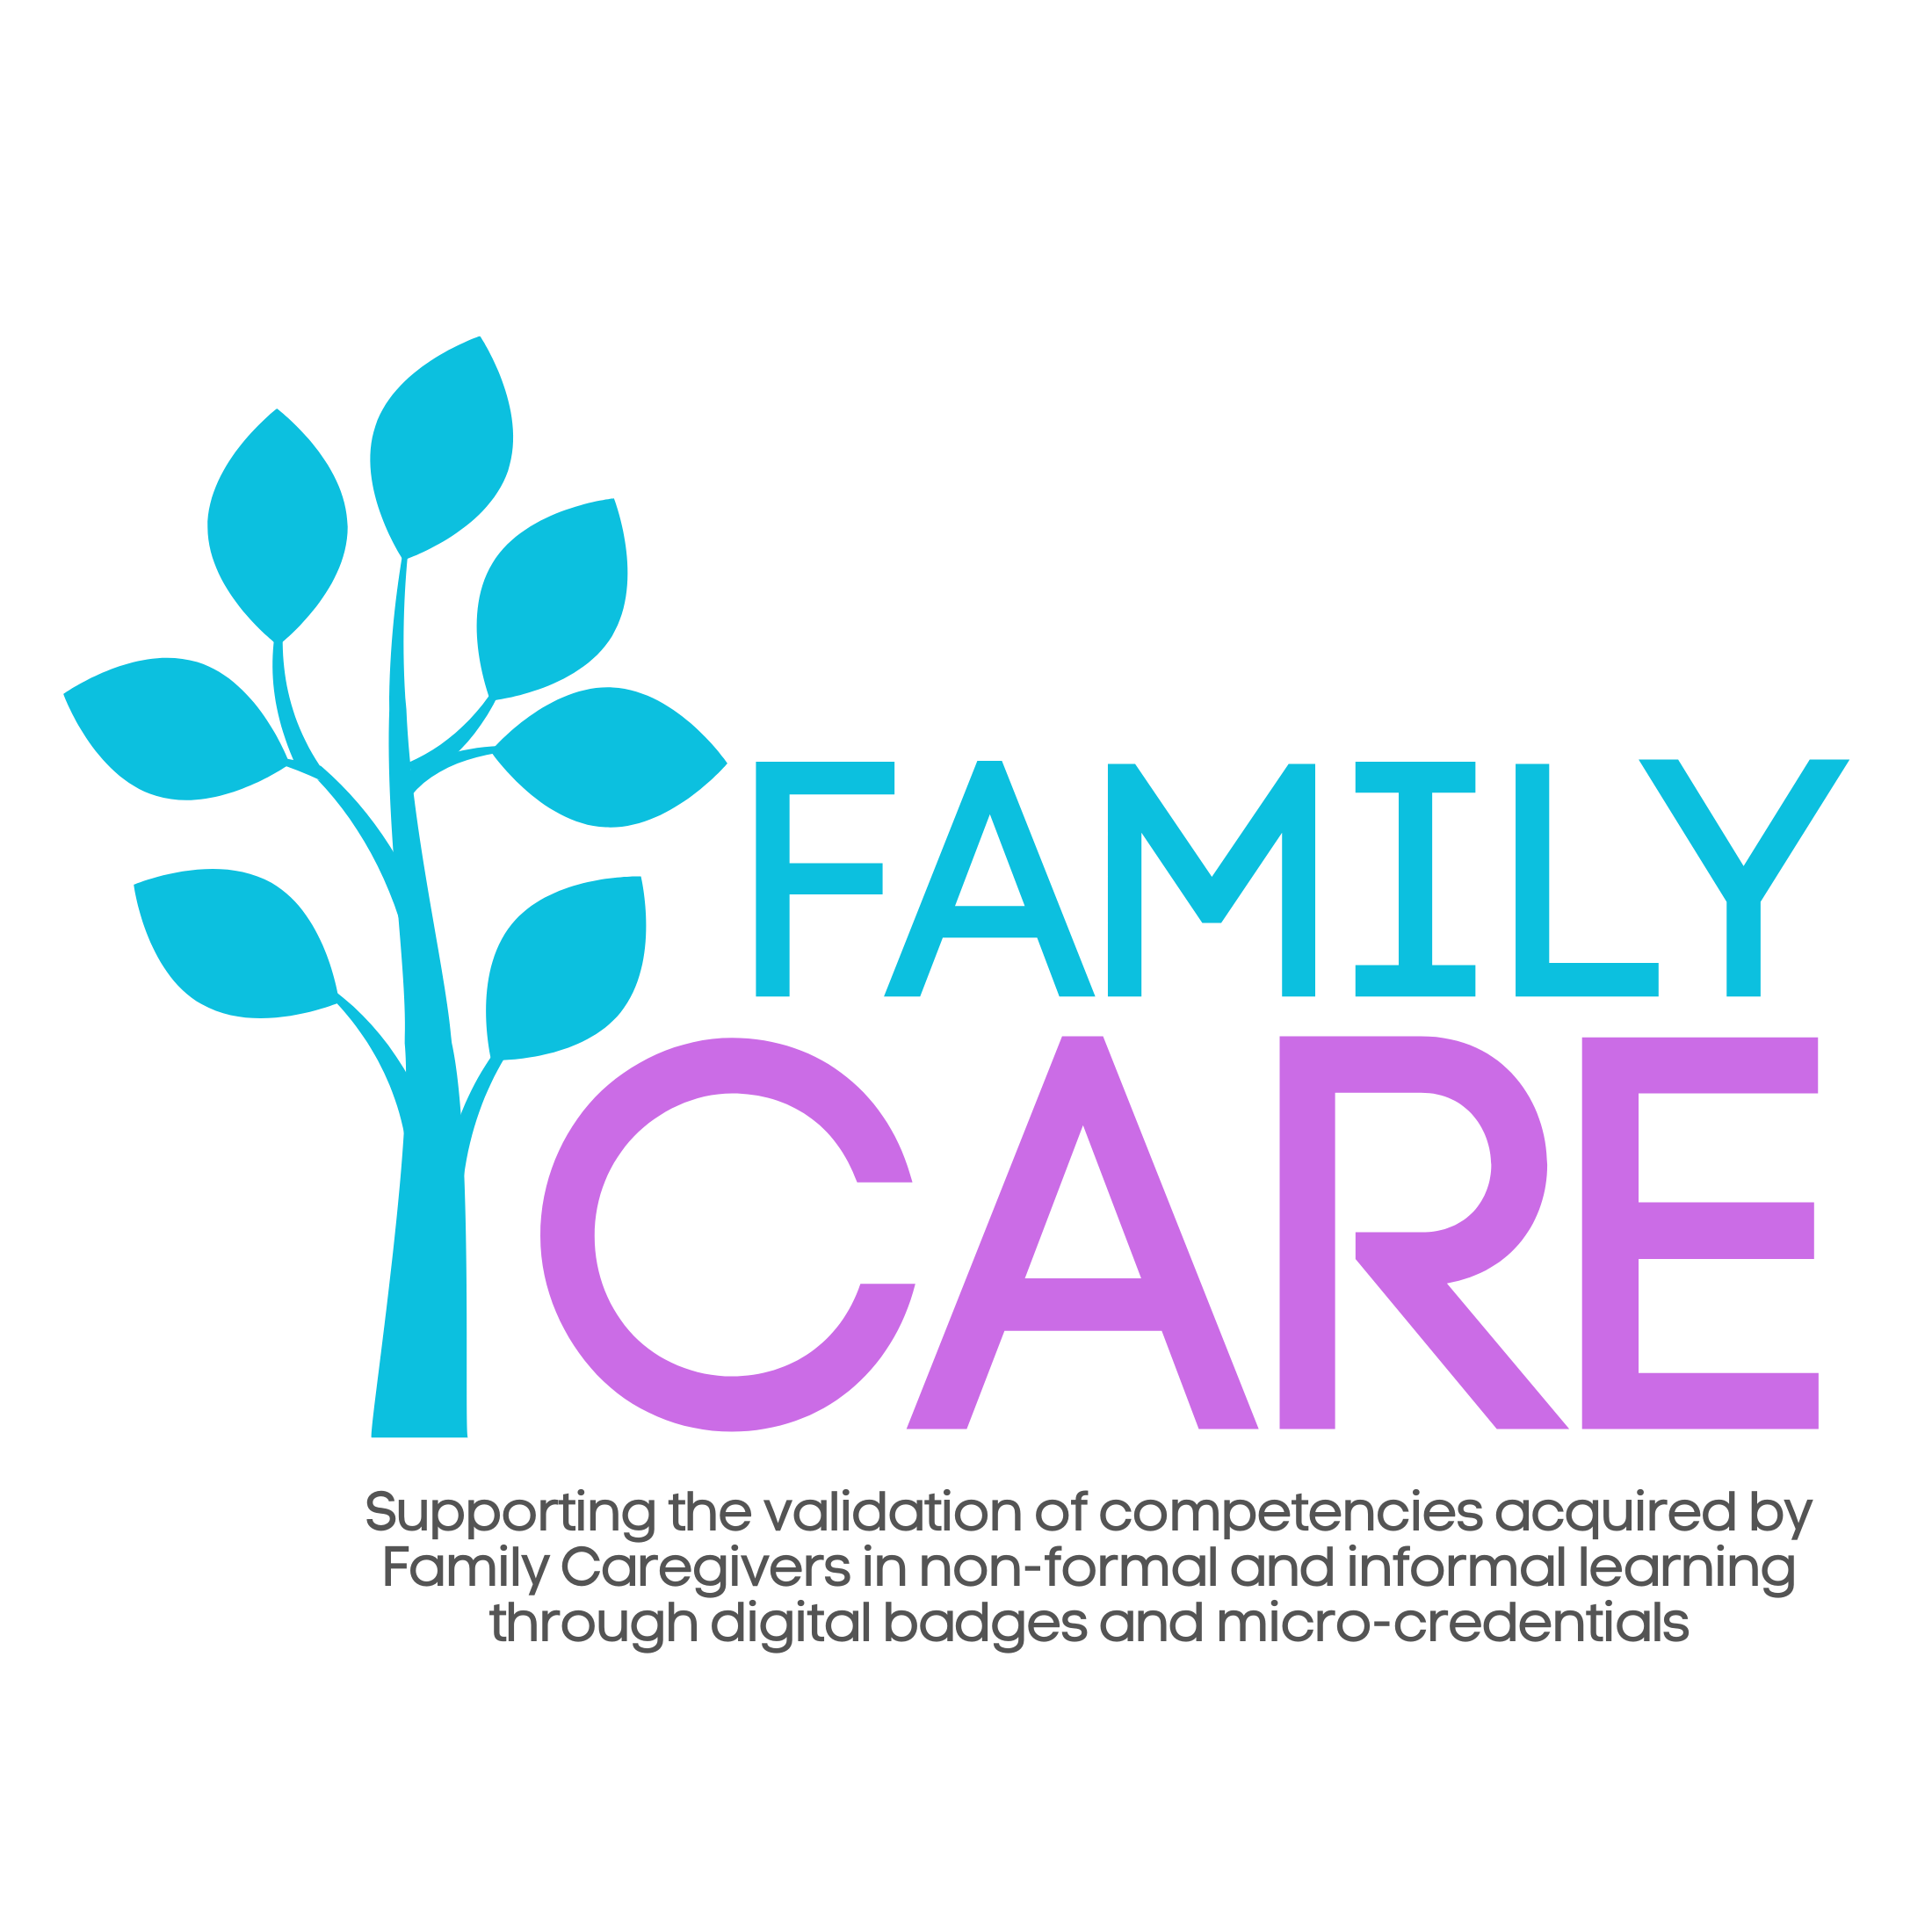 FAMILY CARE.'